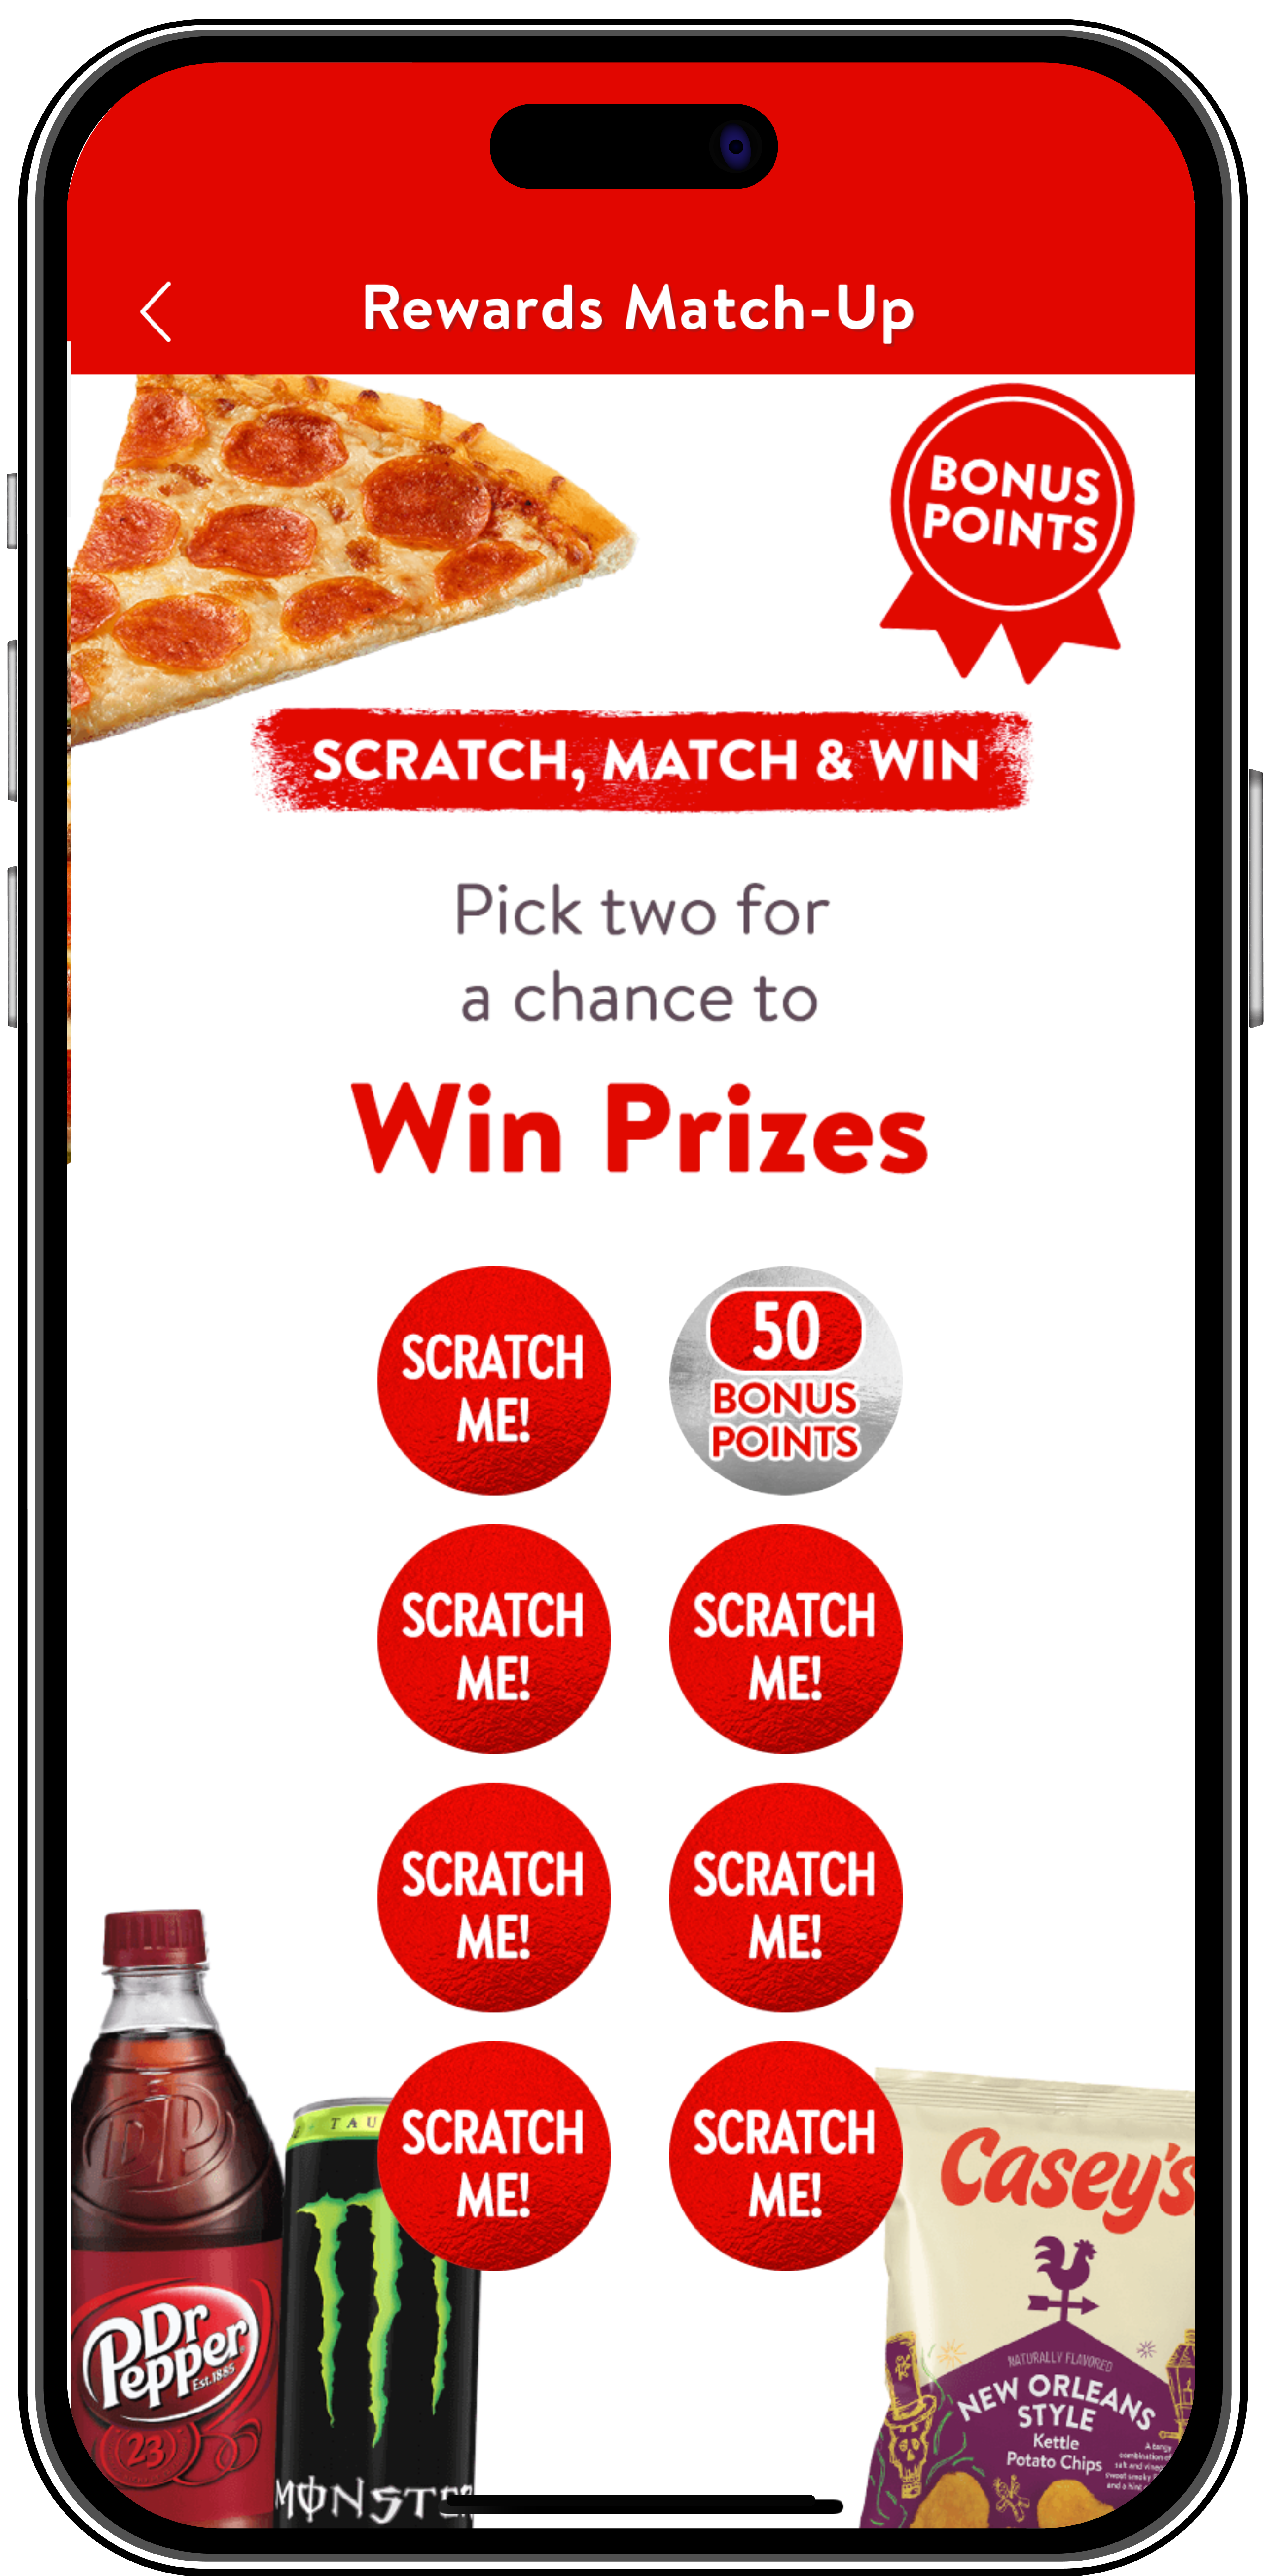 Gif of how to play Casey's Scratch, Match & Win Instant Game